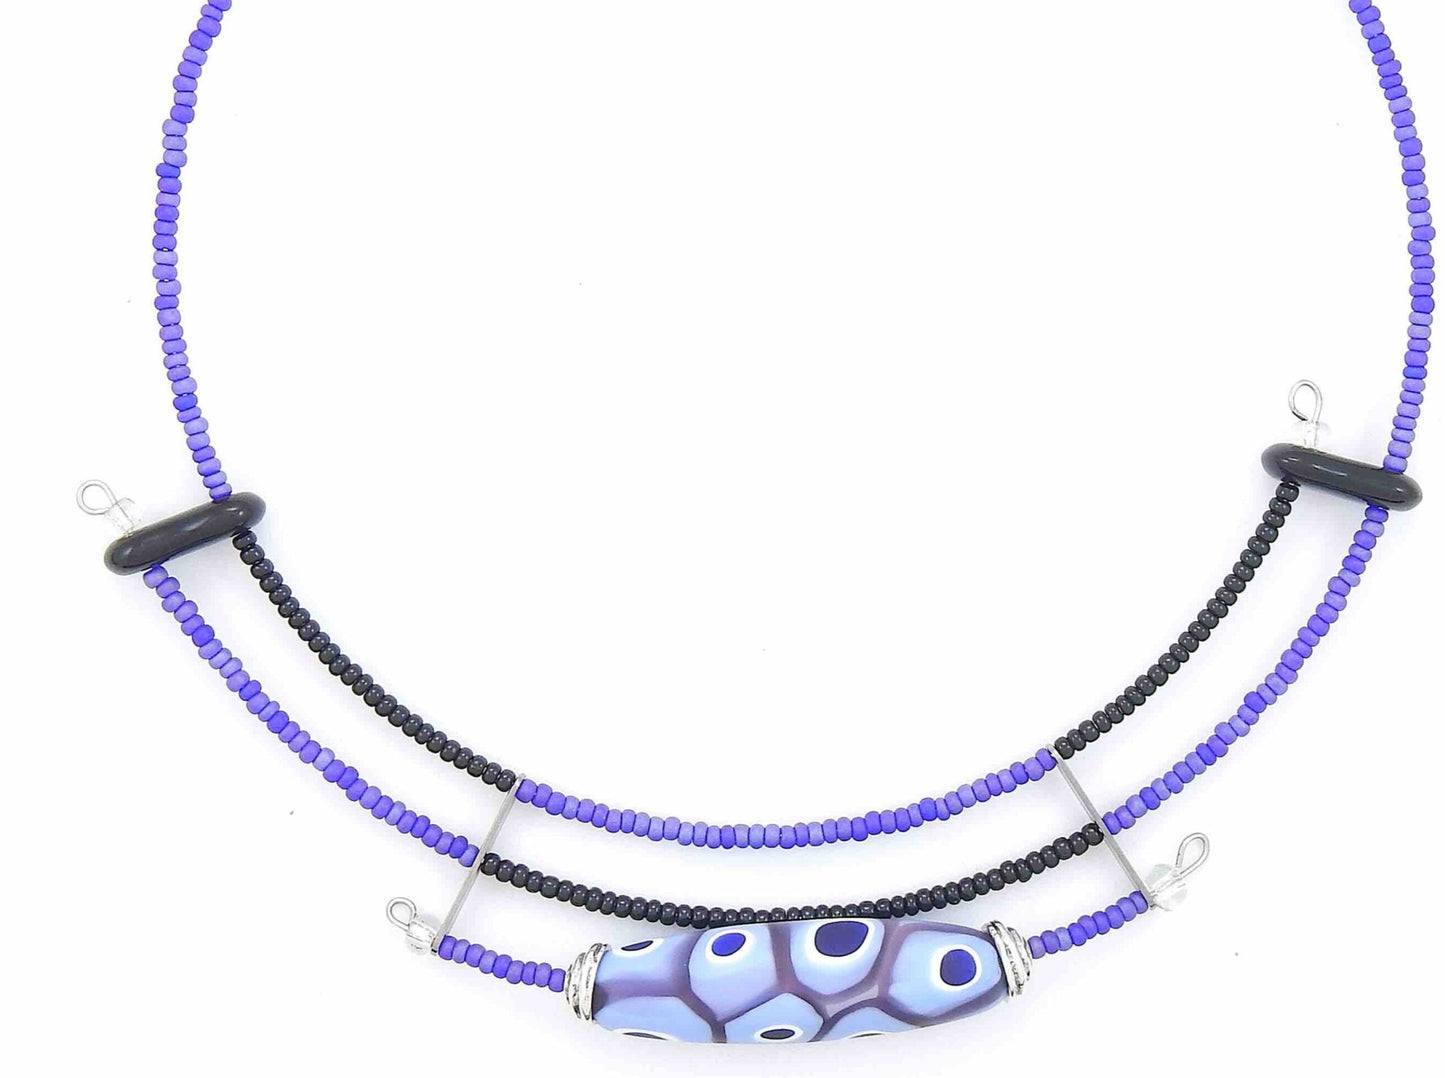 Short asymmetric necklace with matte lilac and black Murano glass bead, eye-dot pattern, metal clasp